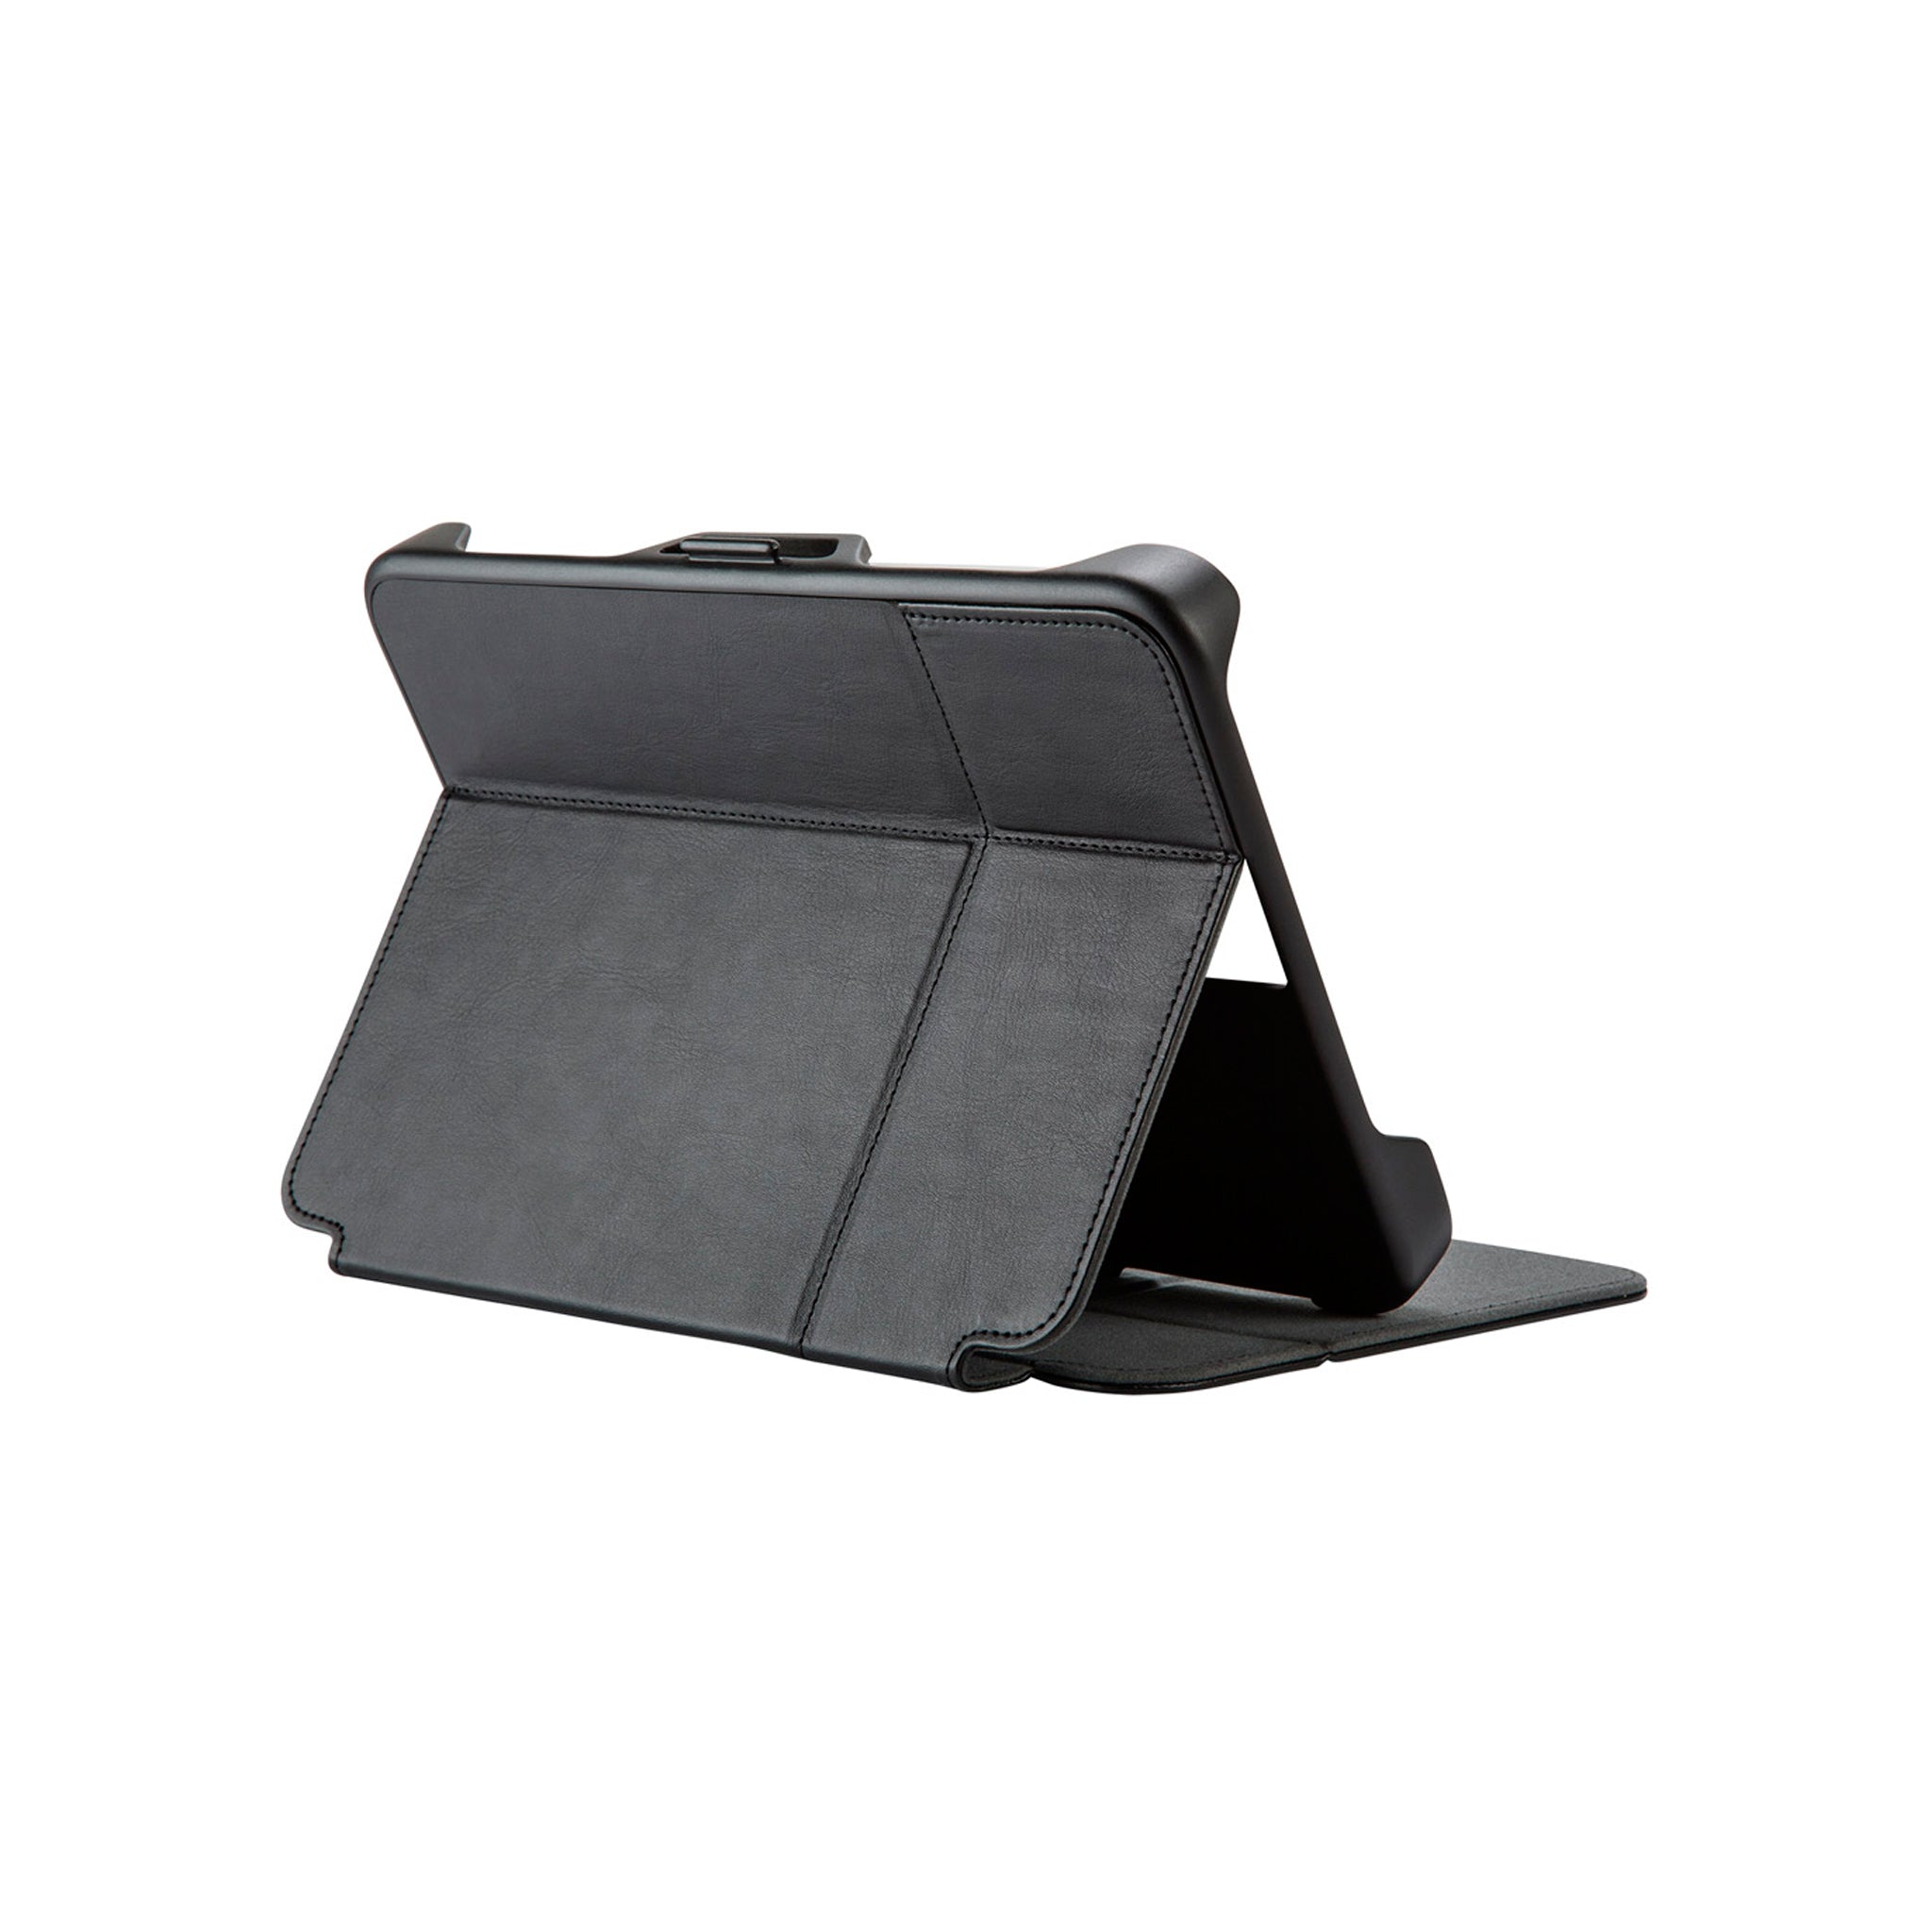 Speck - Stylefolio Flex Case Fits Most 9 To 10.5 Inch Tablets - Black And Slate Gray